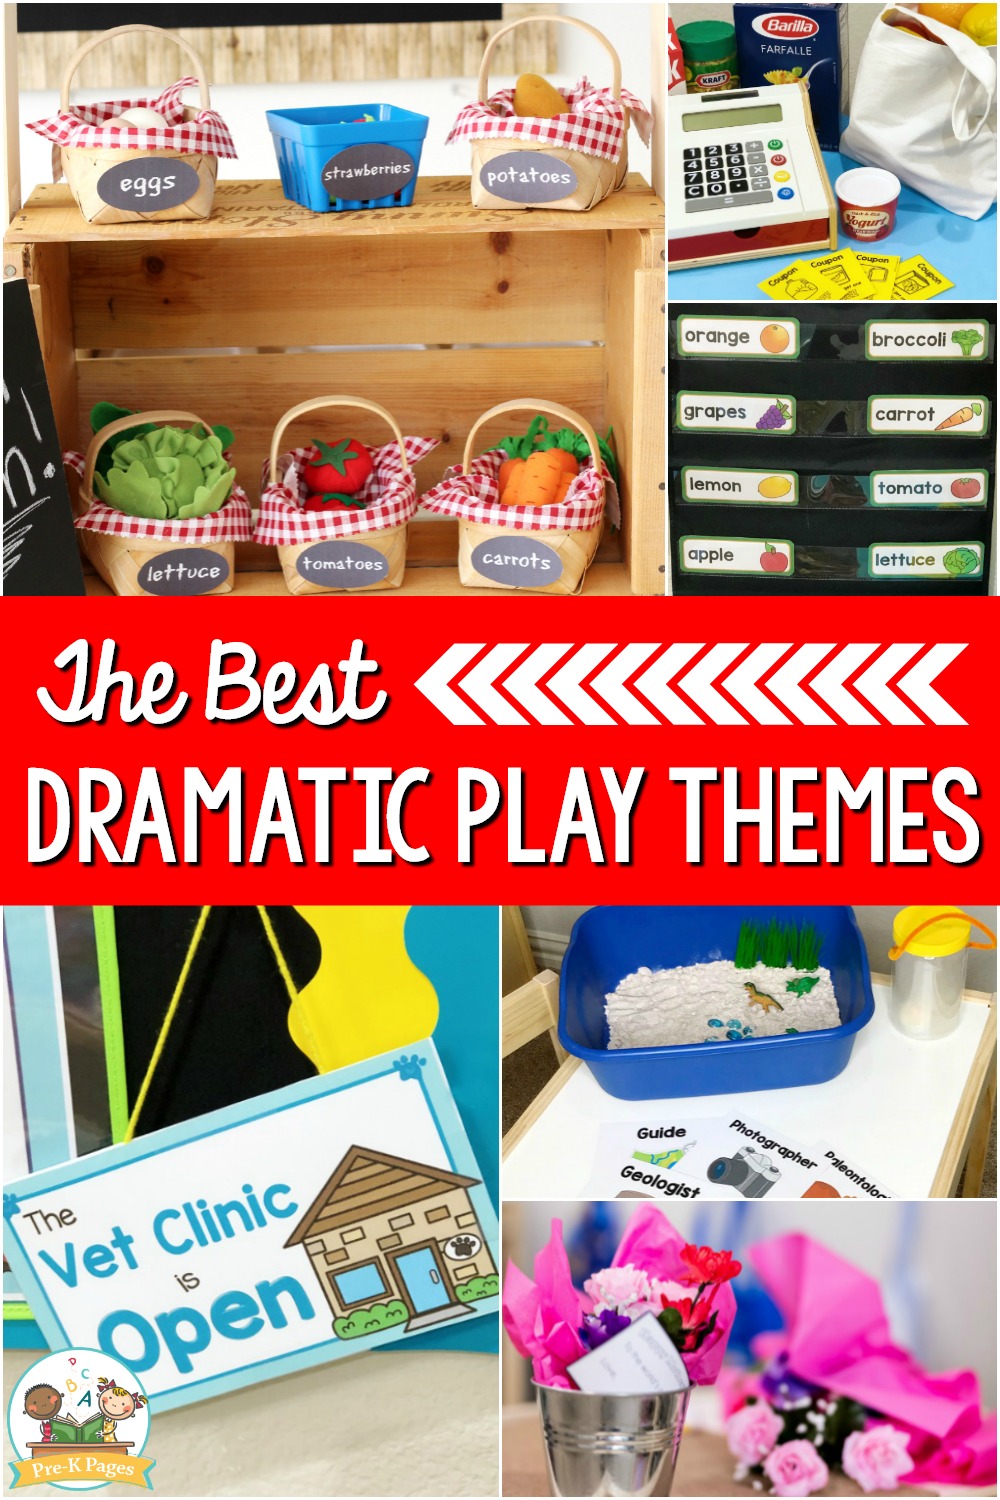 The Best Dramatic Play Themes